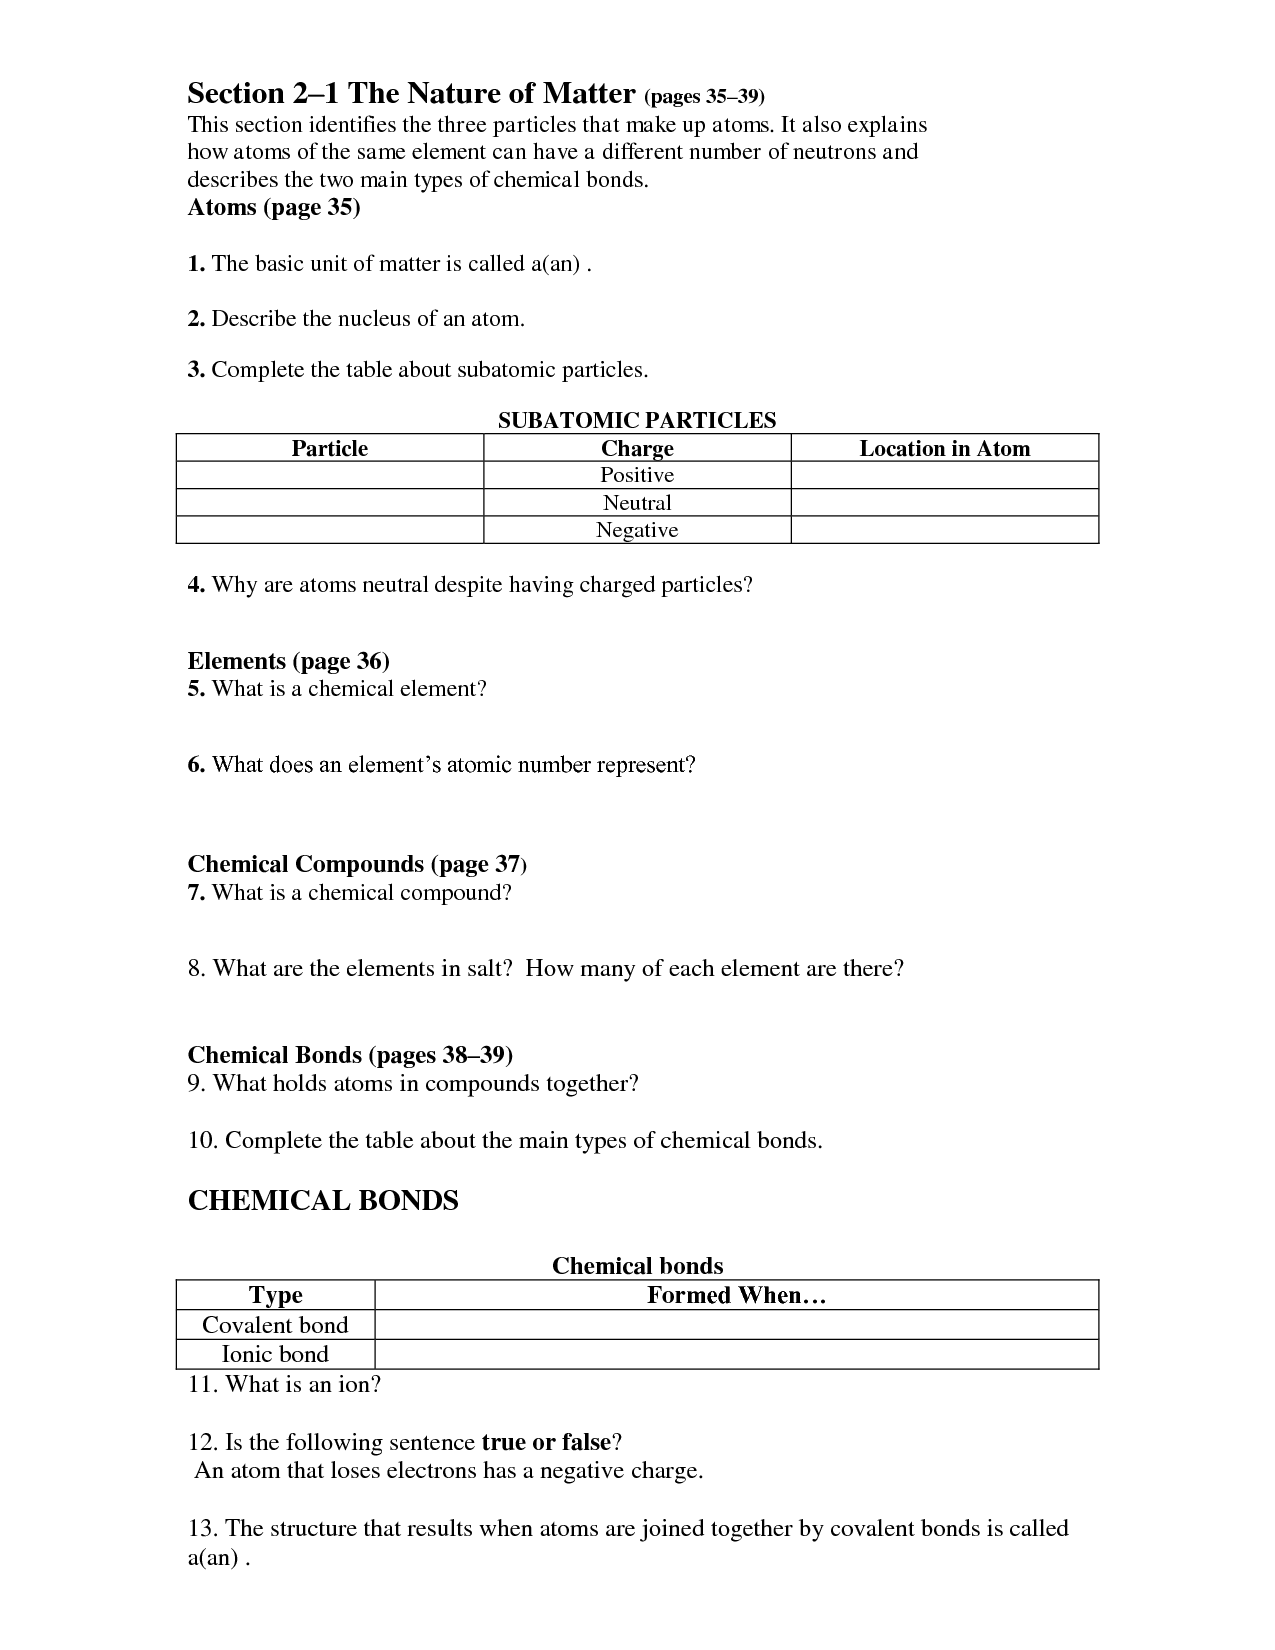 Guided Reading and Study Workbook Chapter 2 Image